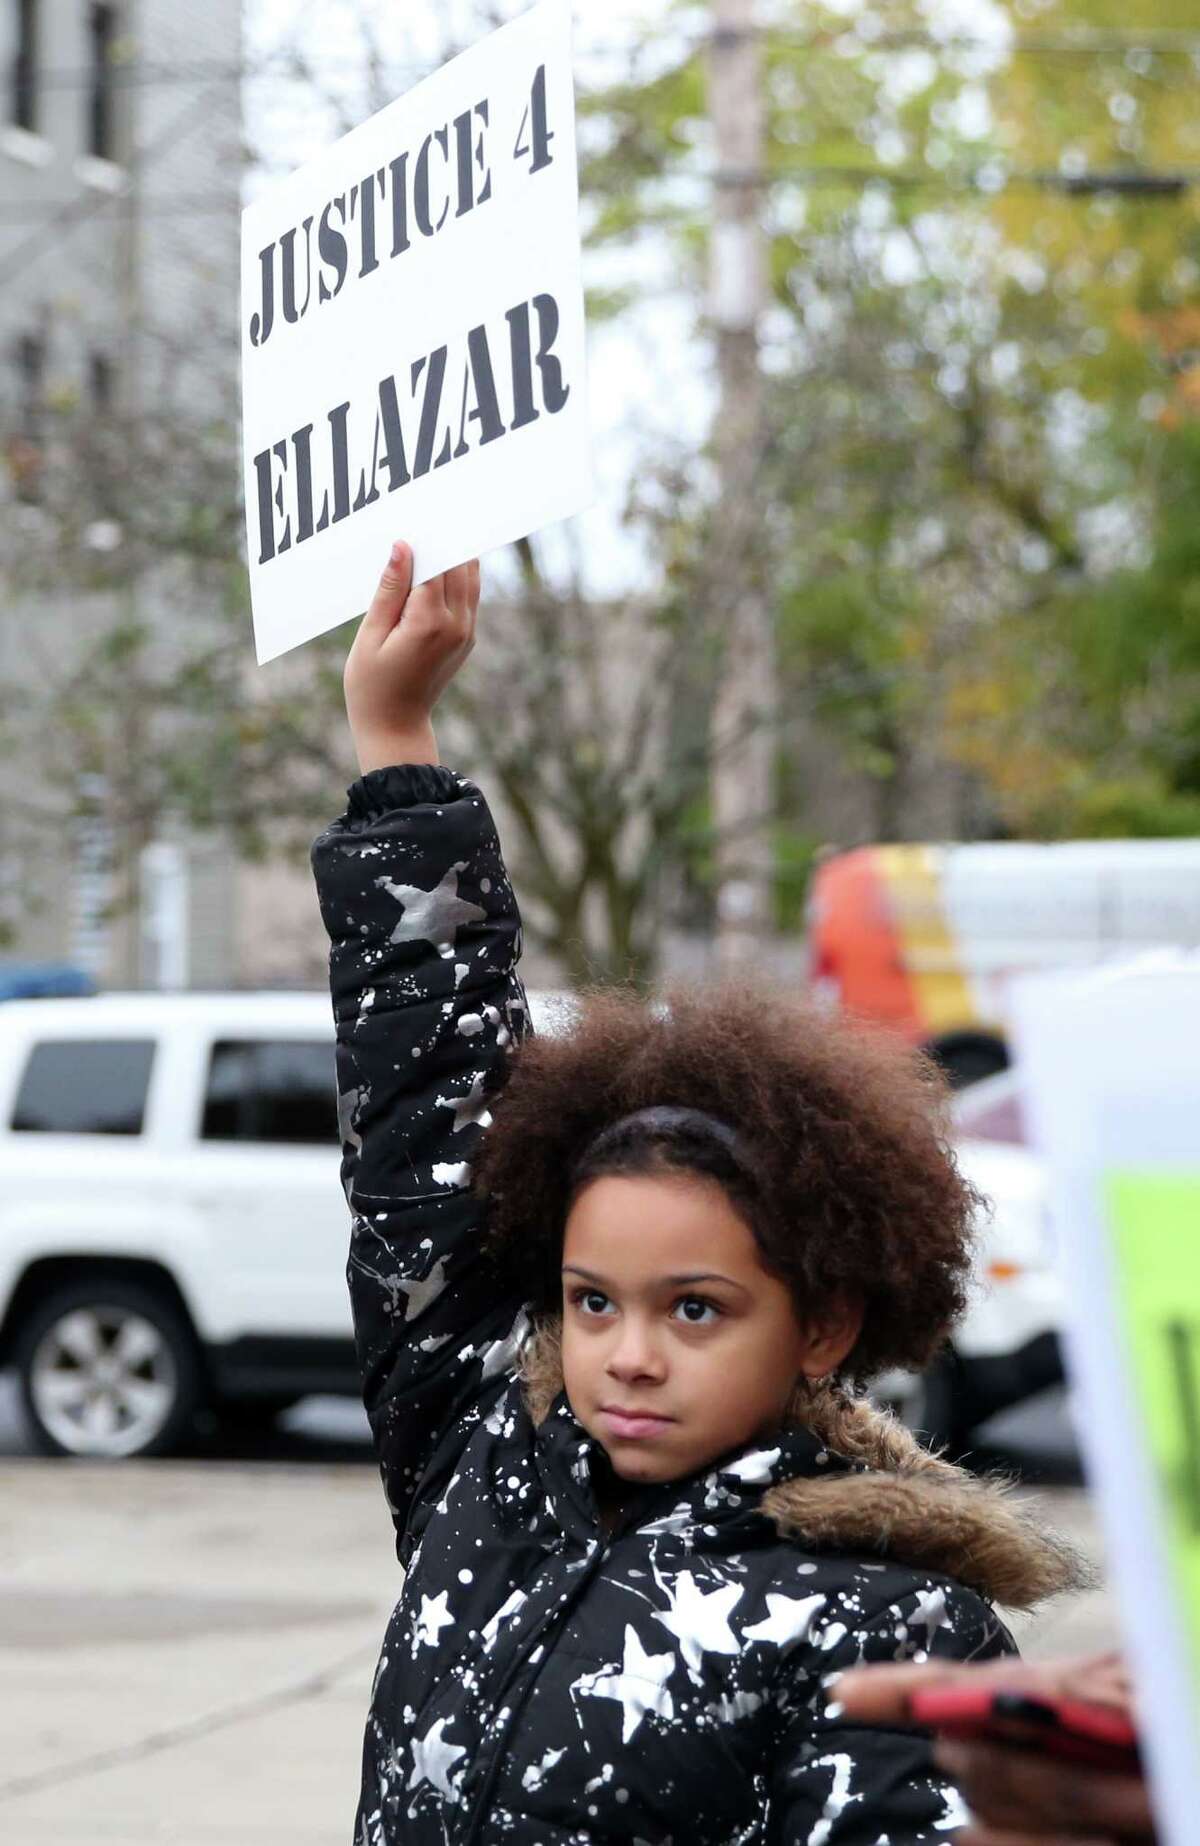 Kamara Fulton, 10, holds up a sign during a rally for Ellazar Williams Thursday, Nov. 1, 2018 at the Albany Police Department Headquarters. (Phoebe Sheehan/Special to the Times Union)